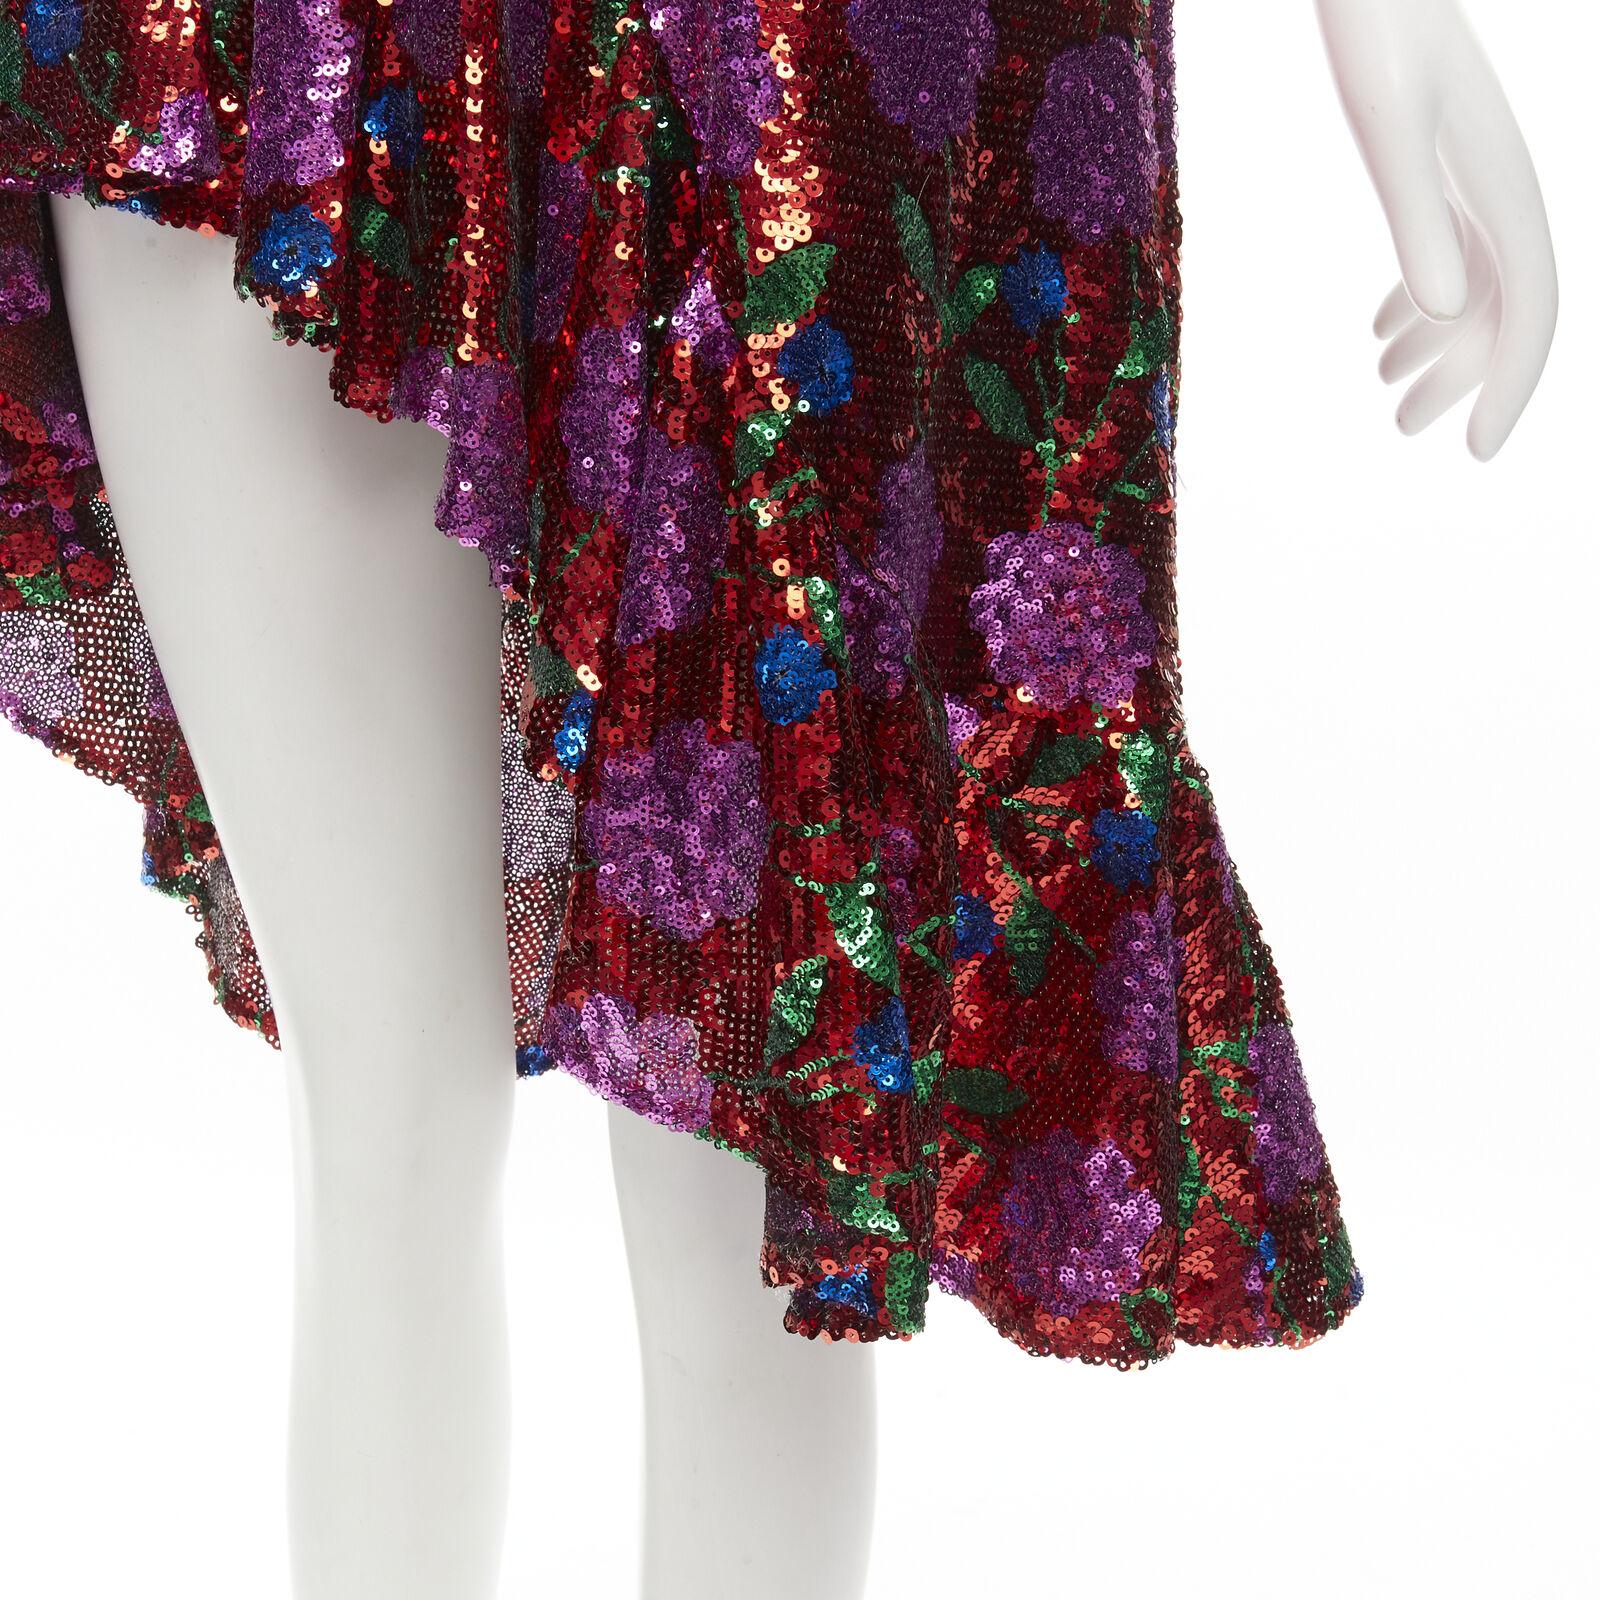 GIUSEPPE DI MORABITO red pink floral sequins asymmetric ruffled skirt IT38 XS
Reference: AAWC/A00318
Brand: Giuseppe Di Morabito
Material: Feels like polyester
Color: Multicolour
Pattern: Floral
Closure: Zip
Lining: Fabric
Extra Details: Back zip